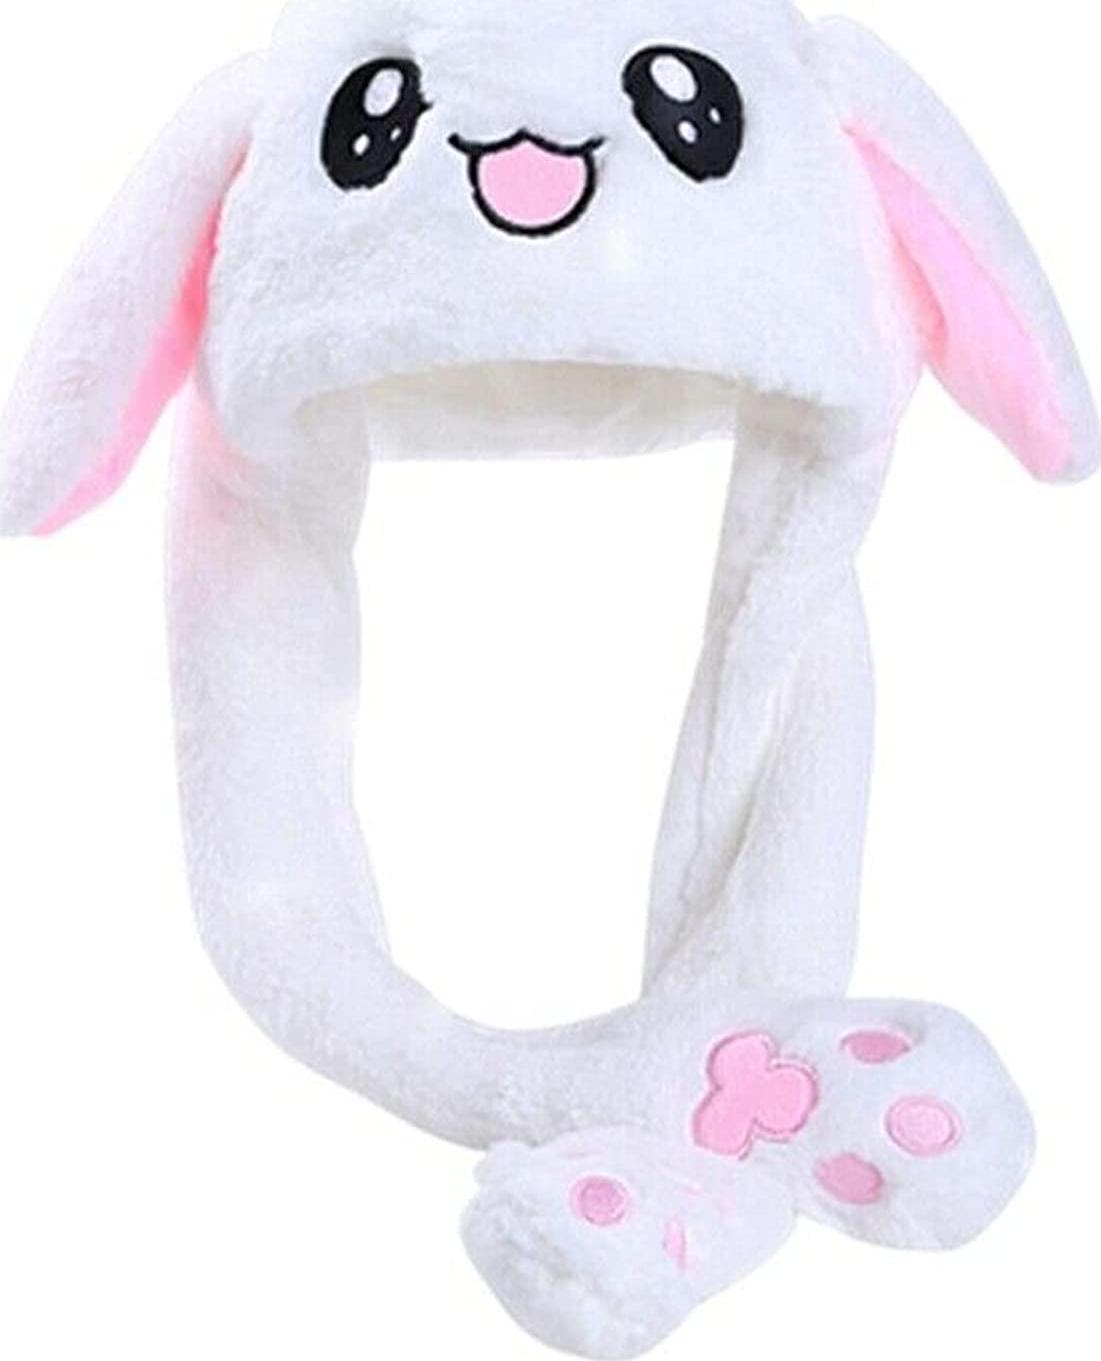 MH MOIHSING, MH MOIHSING Funny Bunny Hat Ear Moving Jumping Rabbit Hat, Dancing Ear Hat Cute Animal Ear Flap Hat Plush Hat Cap with Paws for Women Girls, Cosplay Christmas Party Holiday Hat (White)